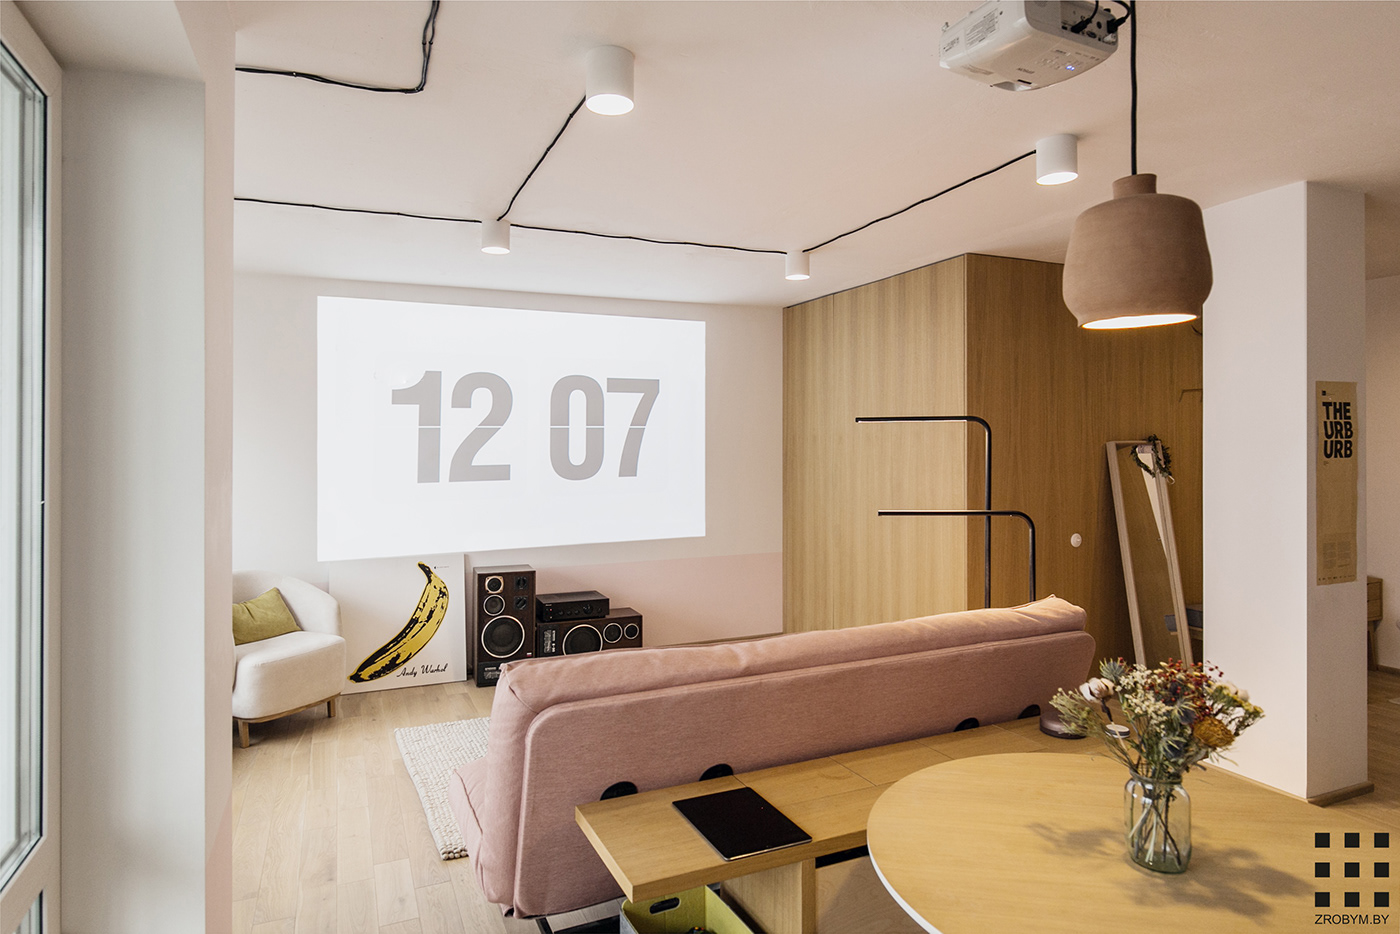 PINK AND WOOD APARTMENT on Behance